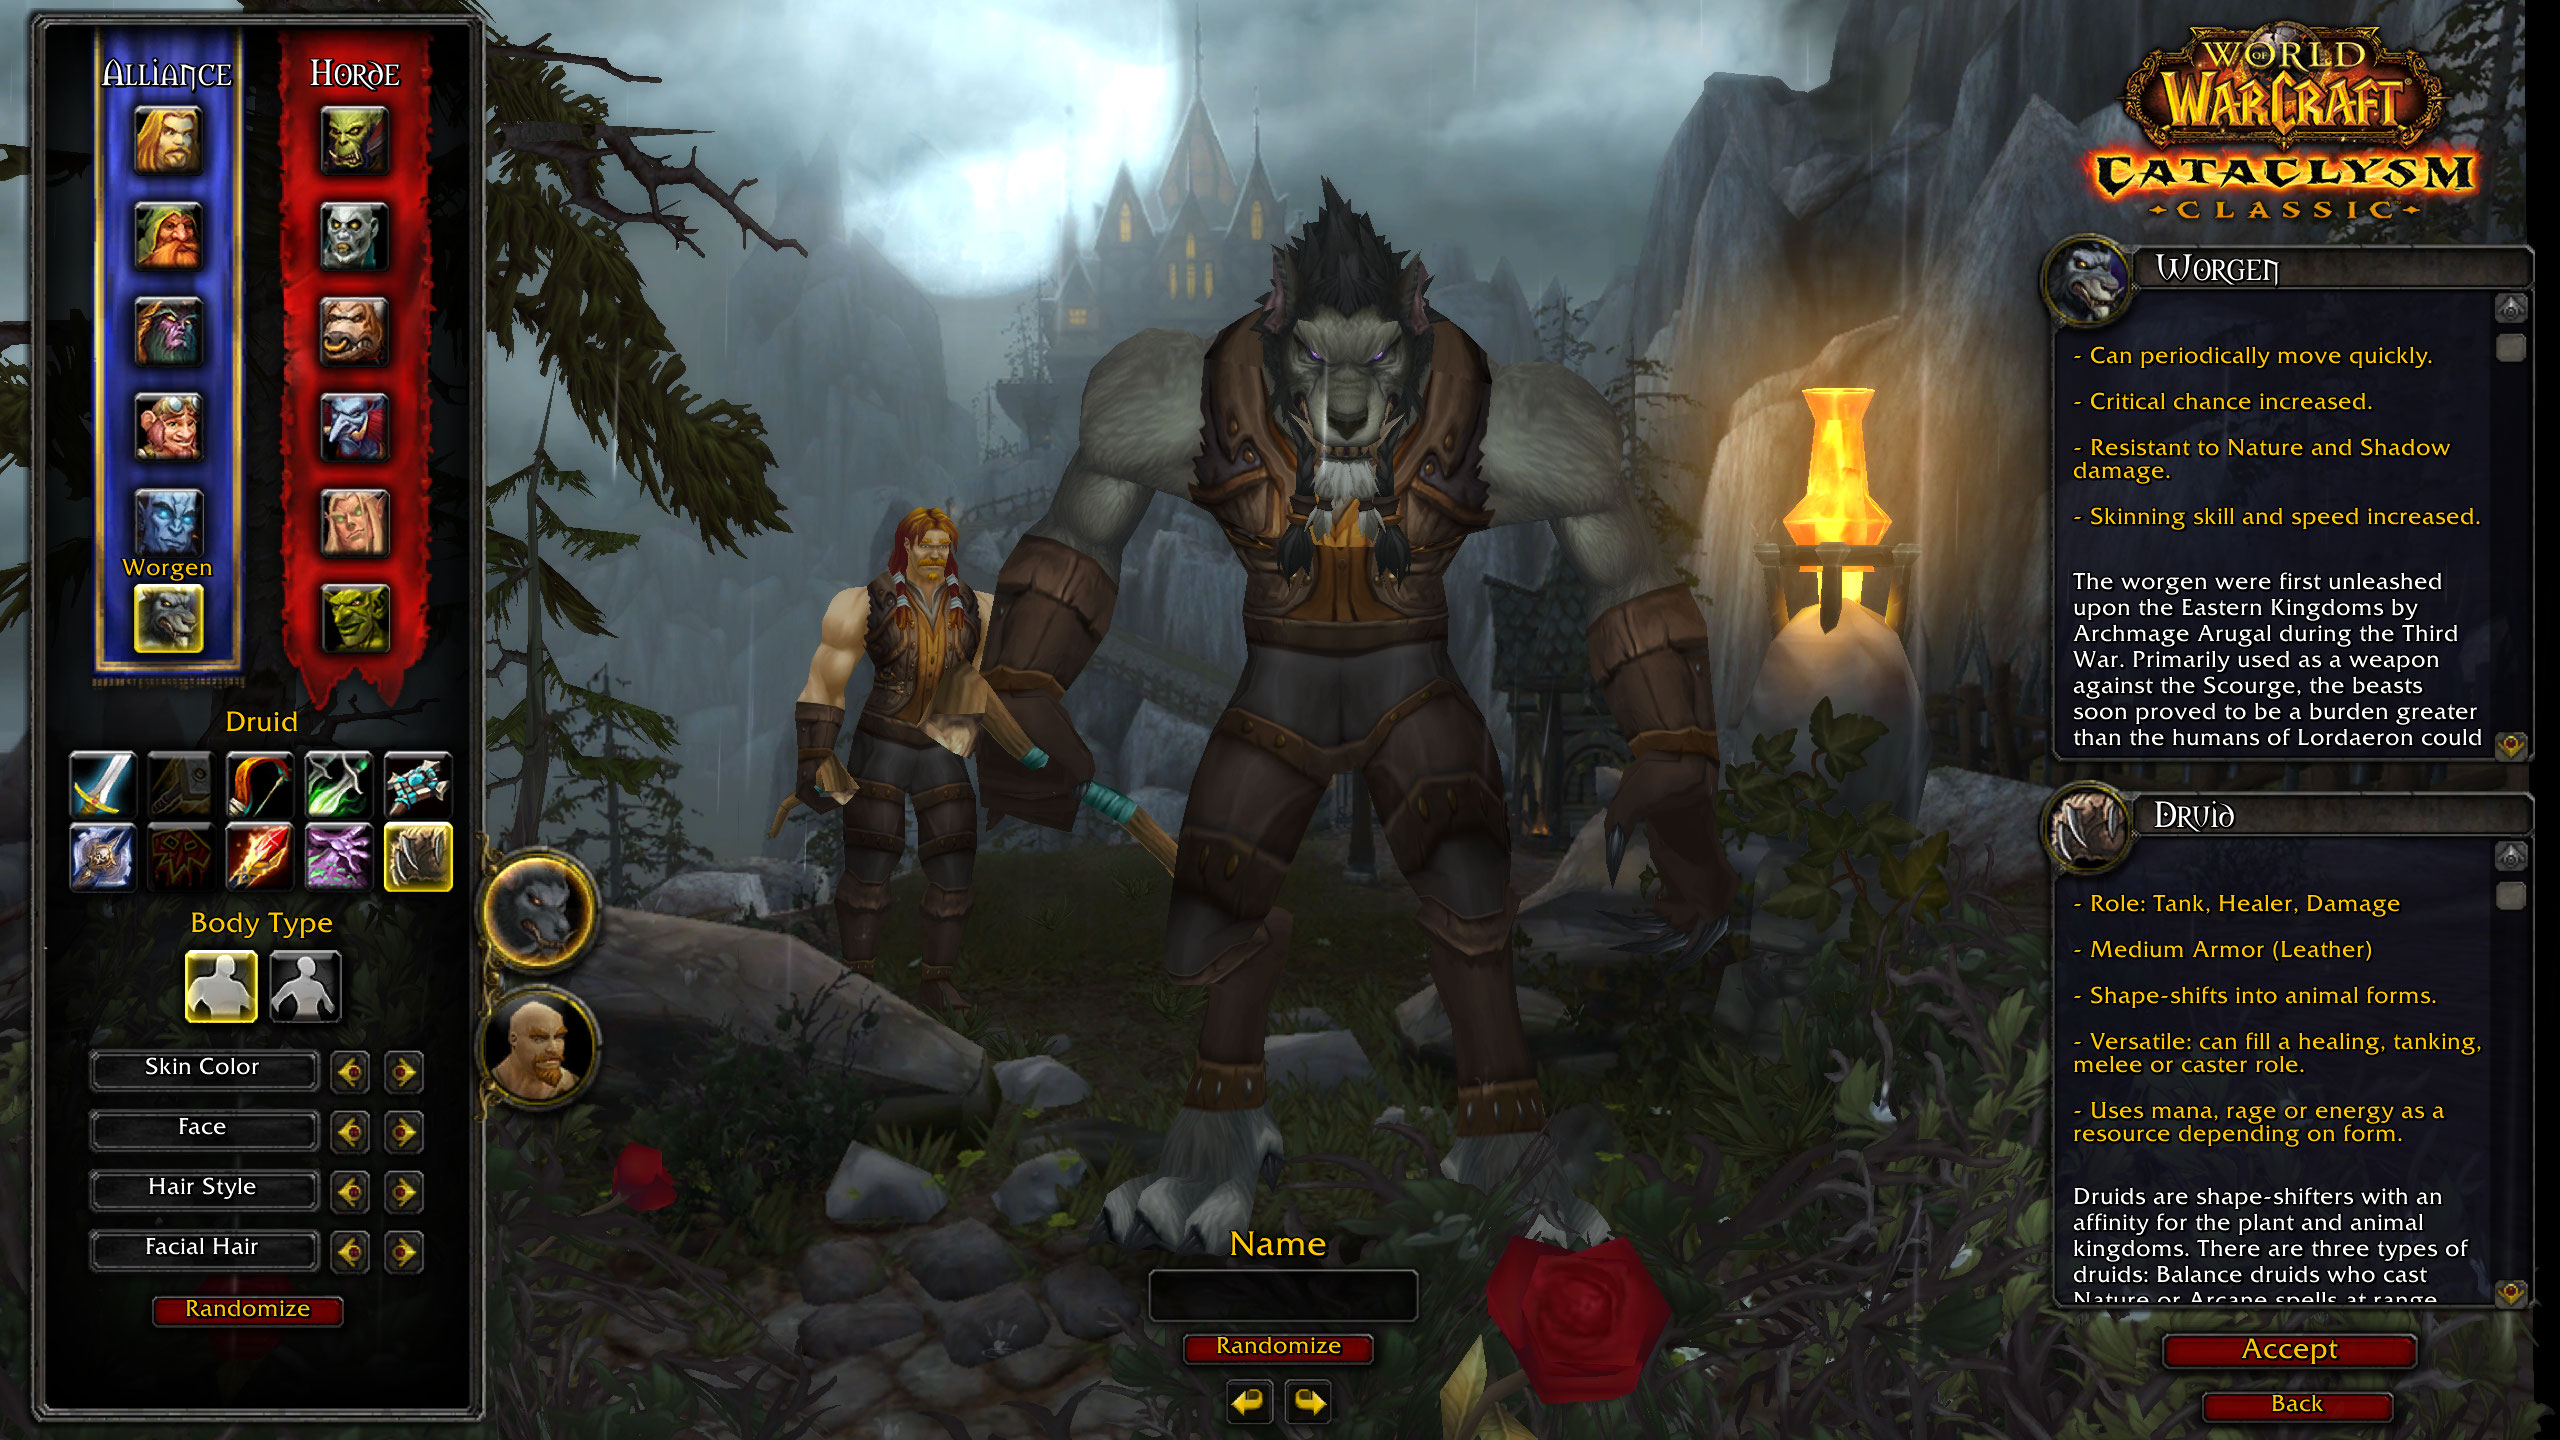 WoW Cataclysm worgen classes - the worgen character creation screen